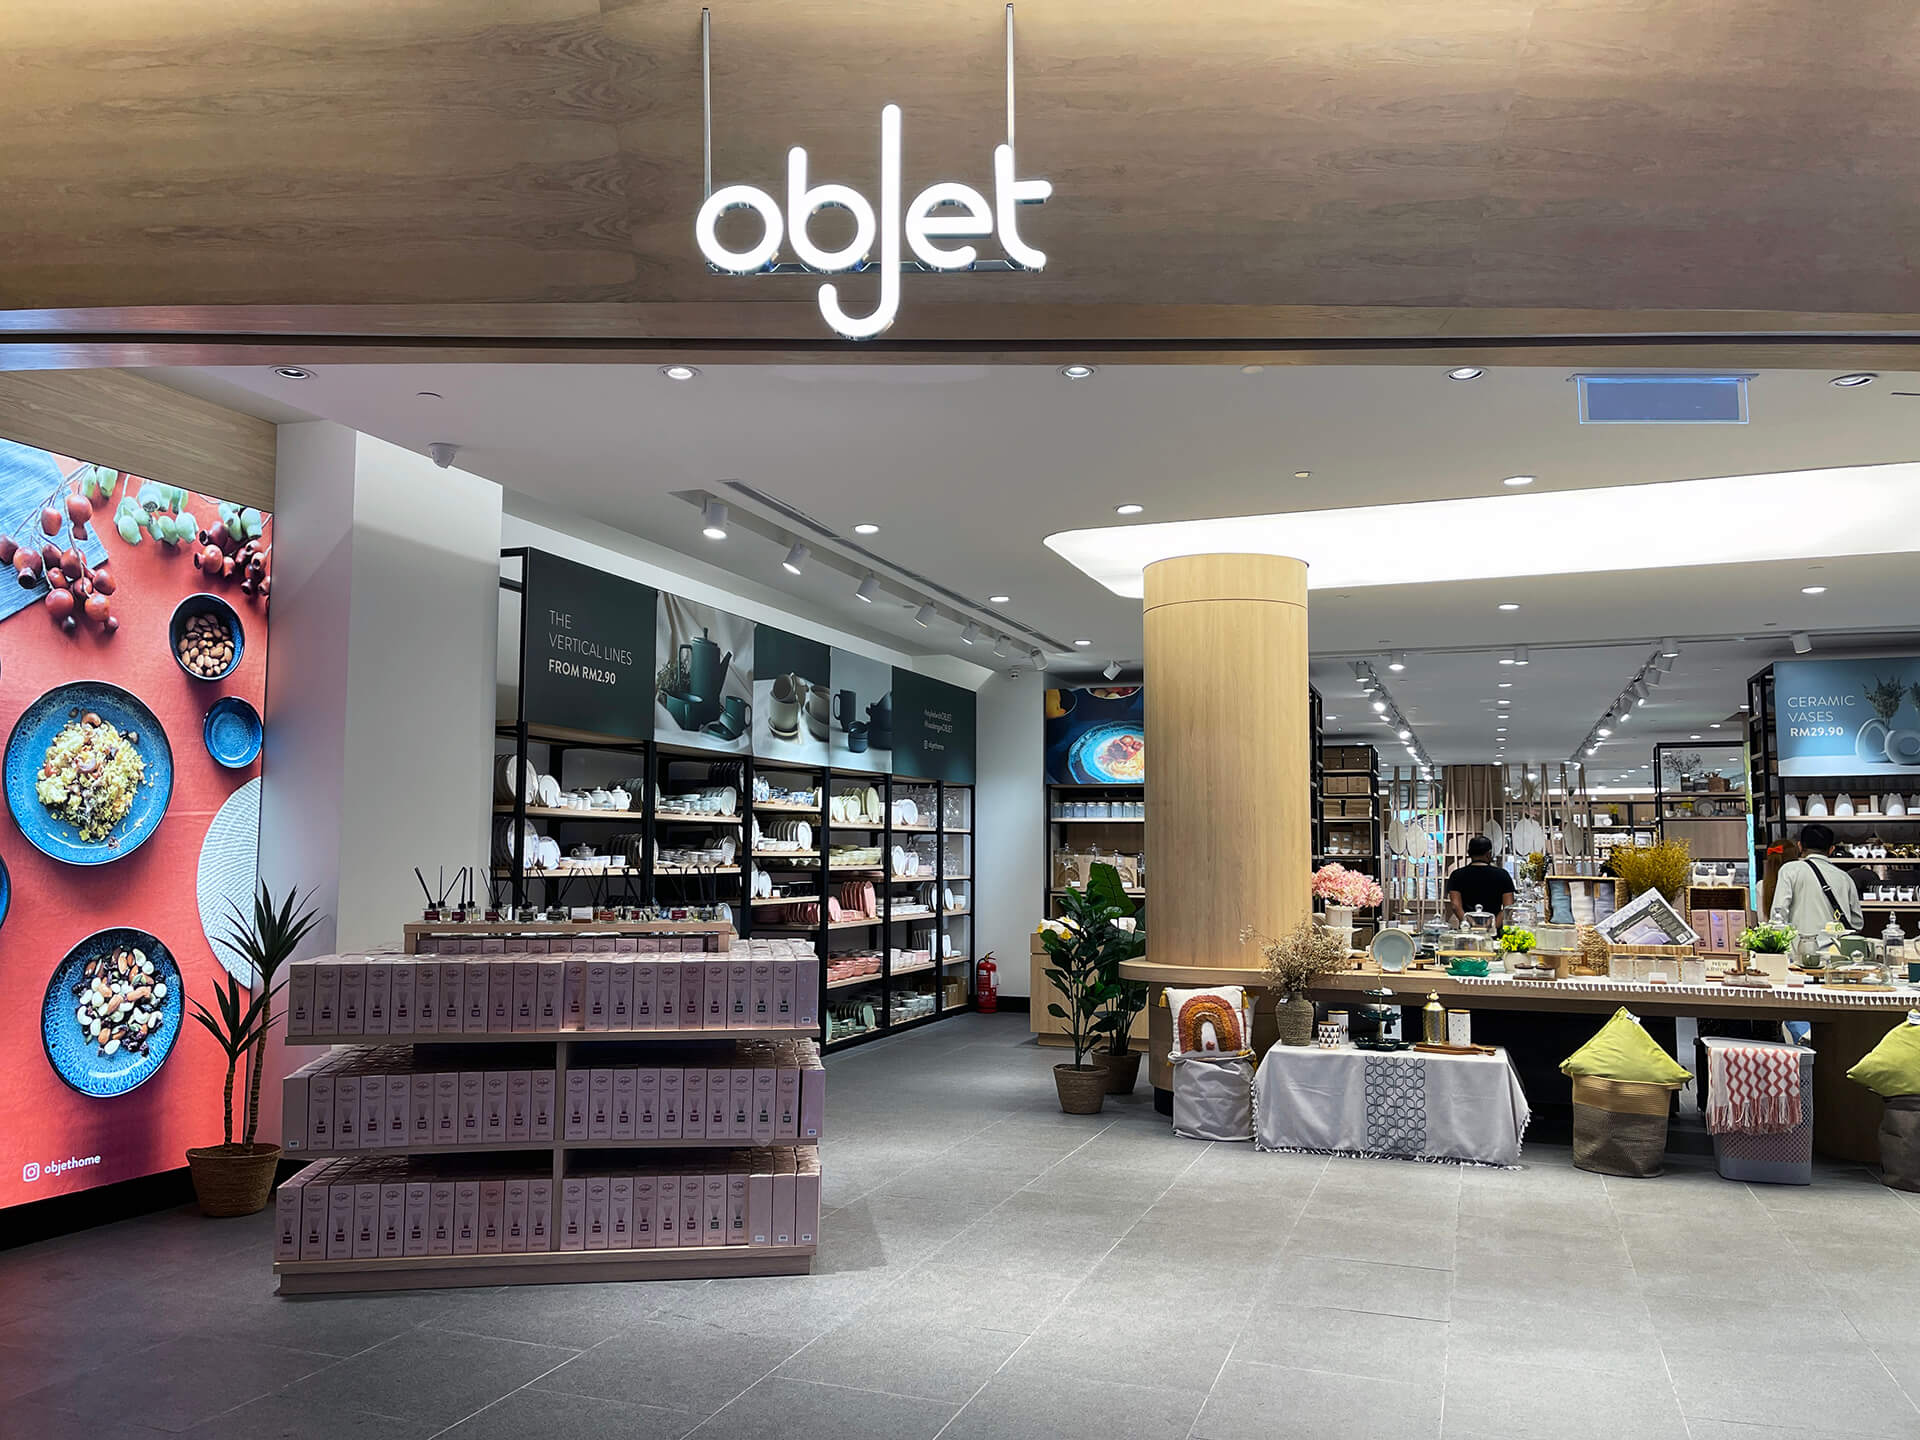 Rejuvenate your eyes with the aesthetics of the Objet store in Sunway Pyramid!